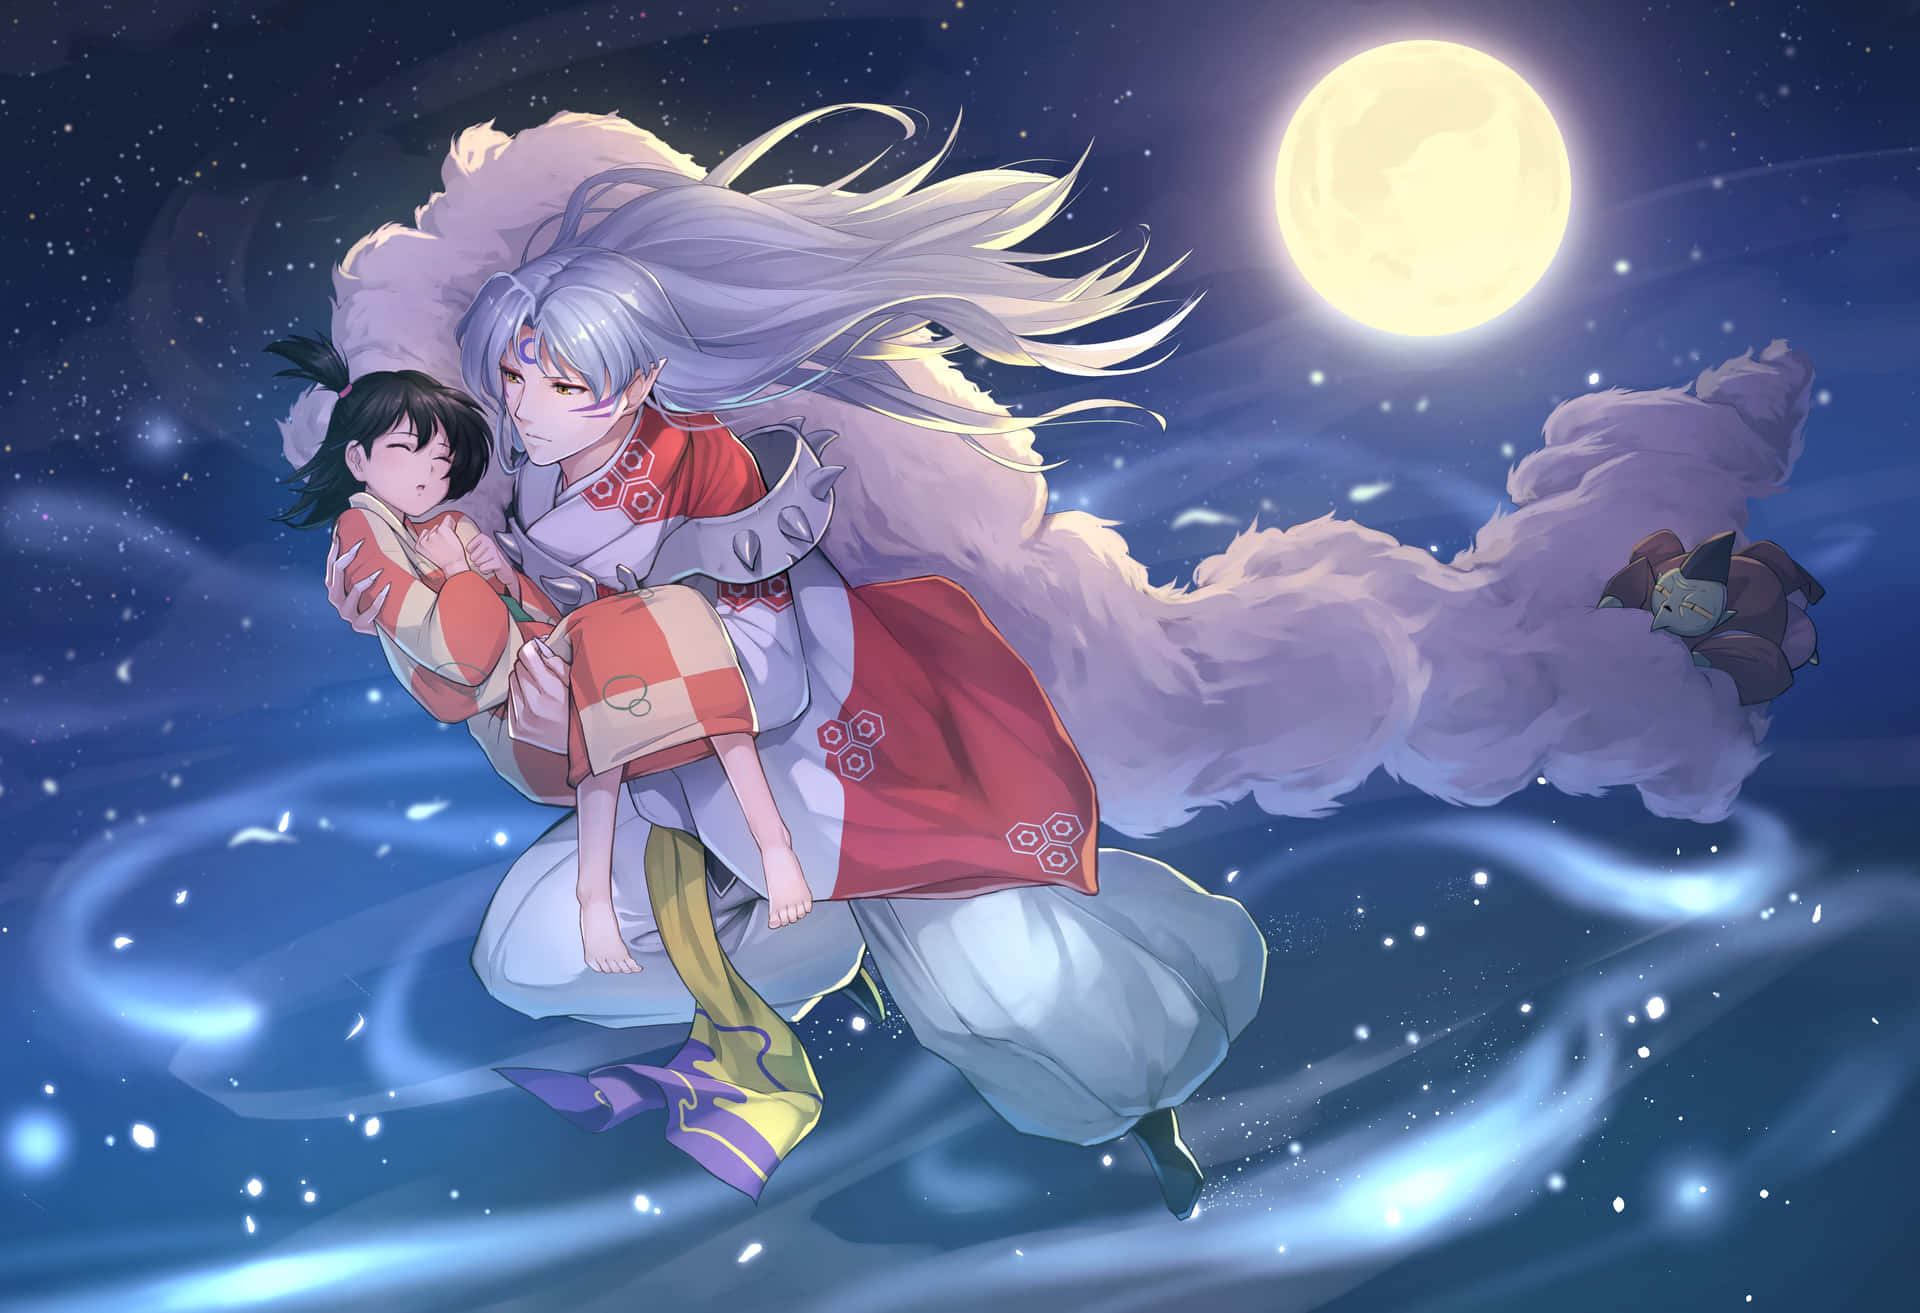 Inuyasha and Rin bonding in a serene moment Wallpaper